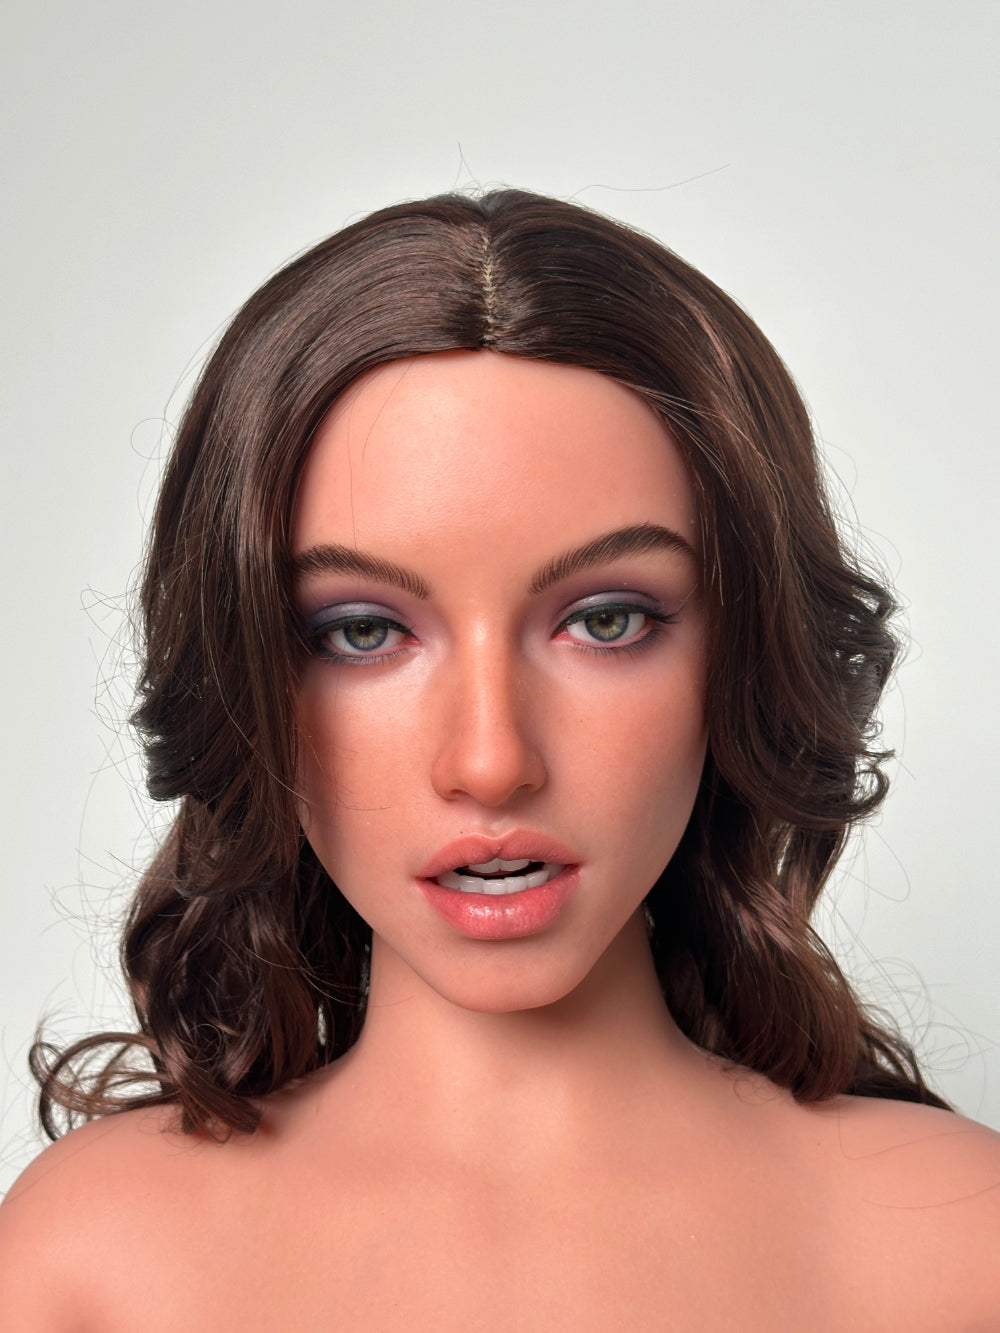 Zelex Doll SLE Series 165 cm D Silicone - ZXE216-3 Movable Jaw